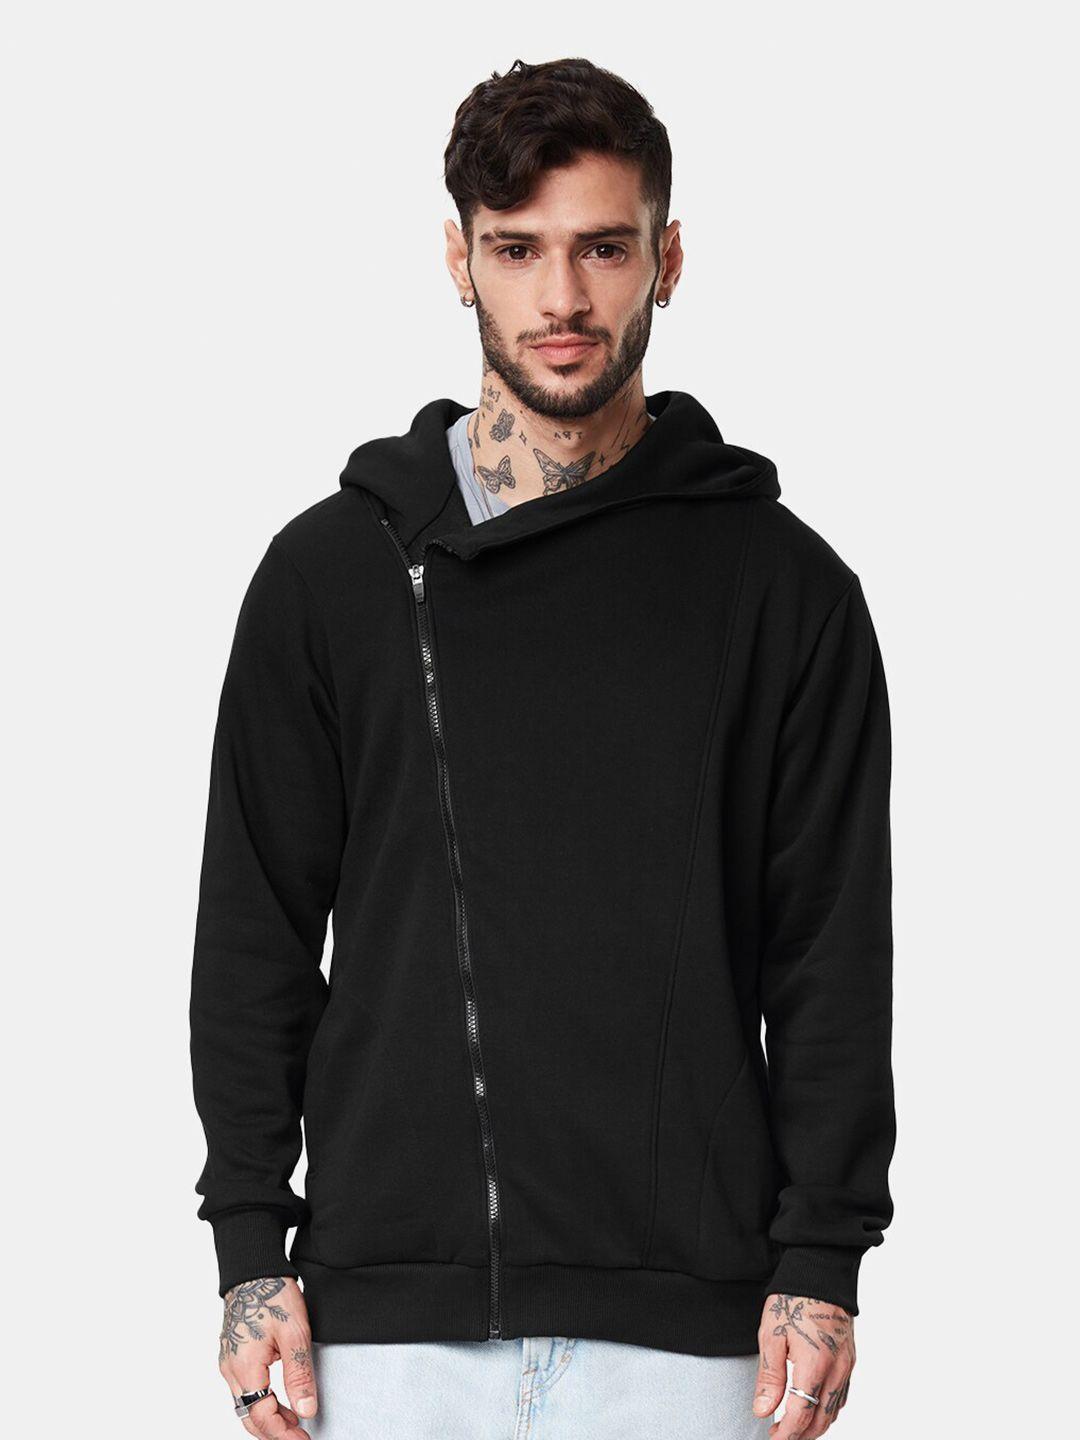 the-souled-store-men-hooded-cotton-sweatshirt